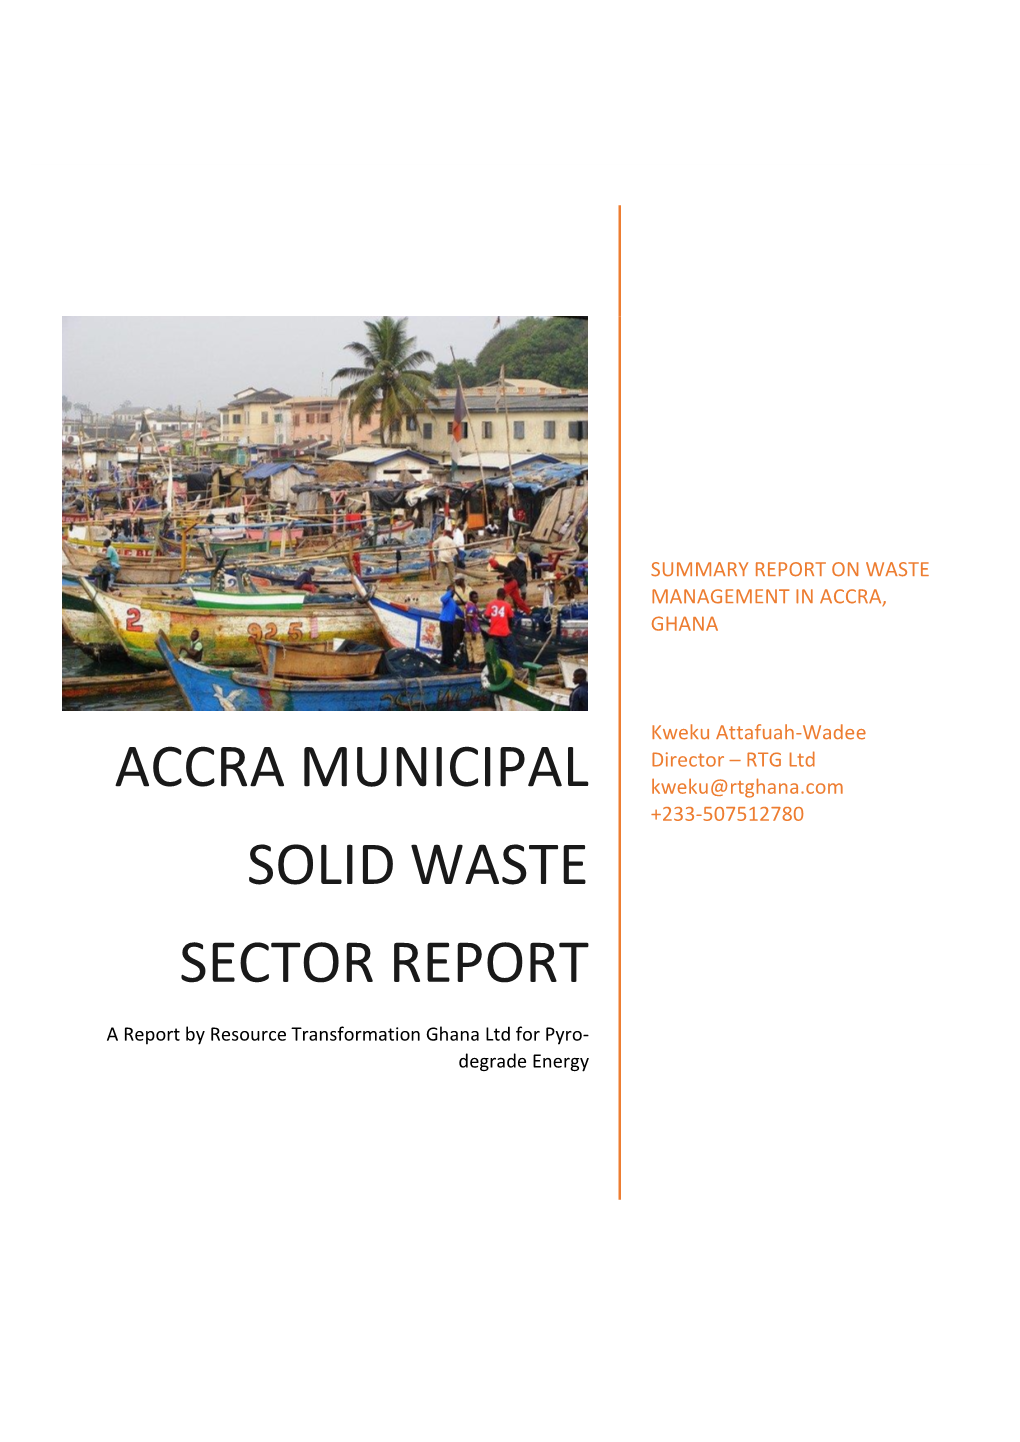 ACCRA MUNICIPAL Solid WASTE SECTOR REPORT